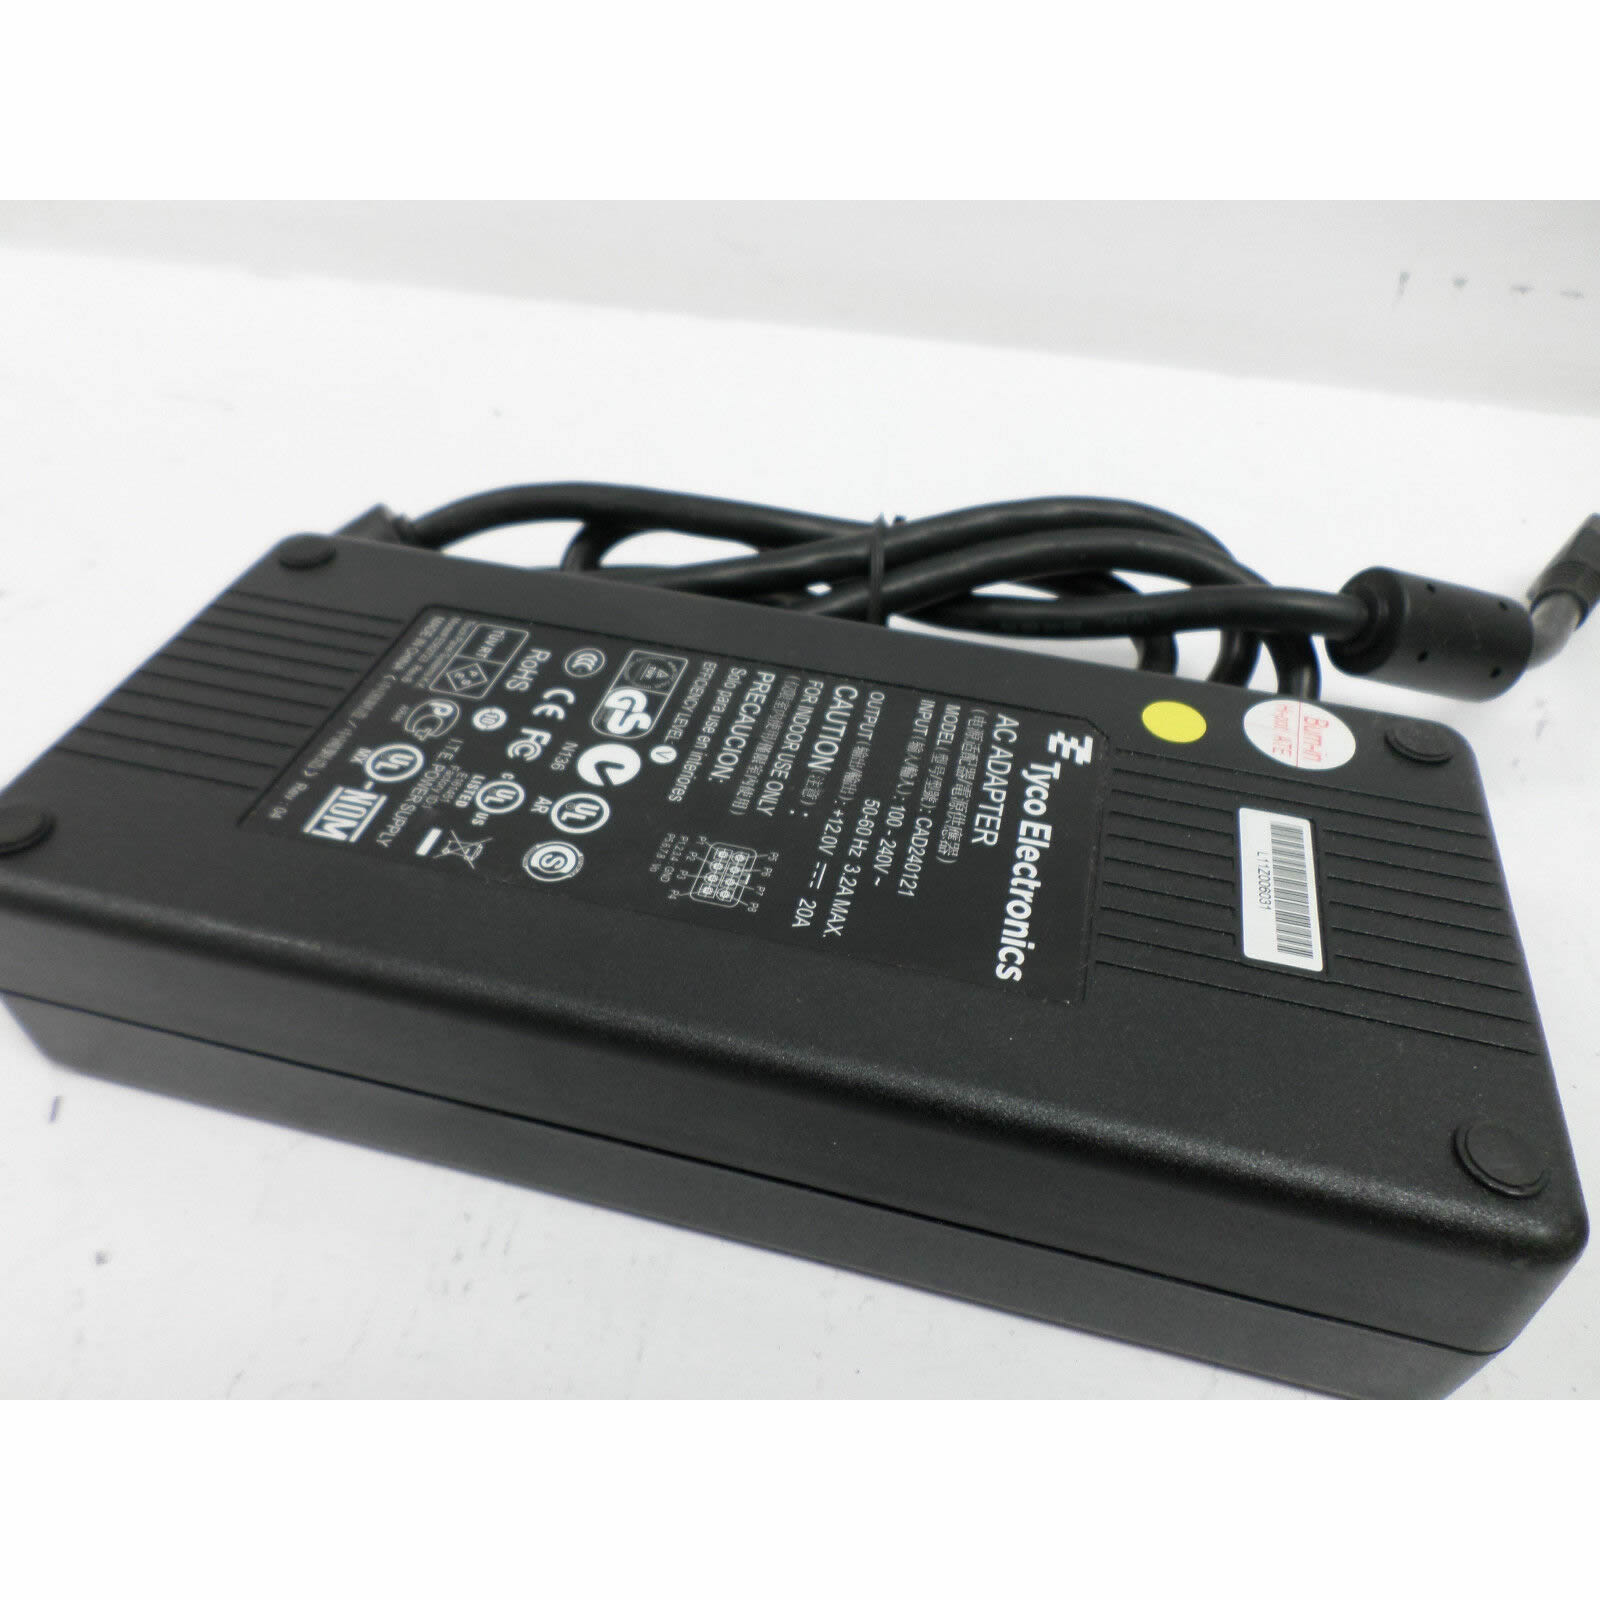 US Genuine $45.00 Tyco Electronics Original Ac Adapter 12V 20A 240W  CAD240121 ELO ALL-IN-ONE Power Supply 